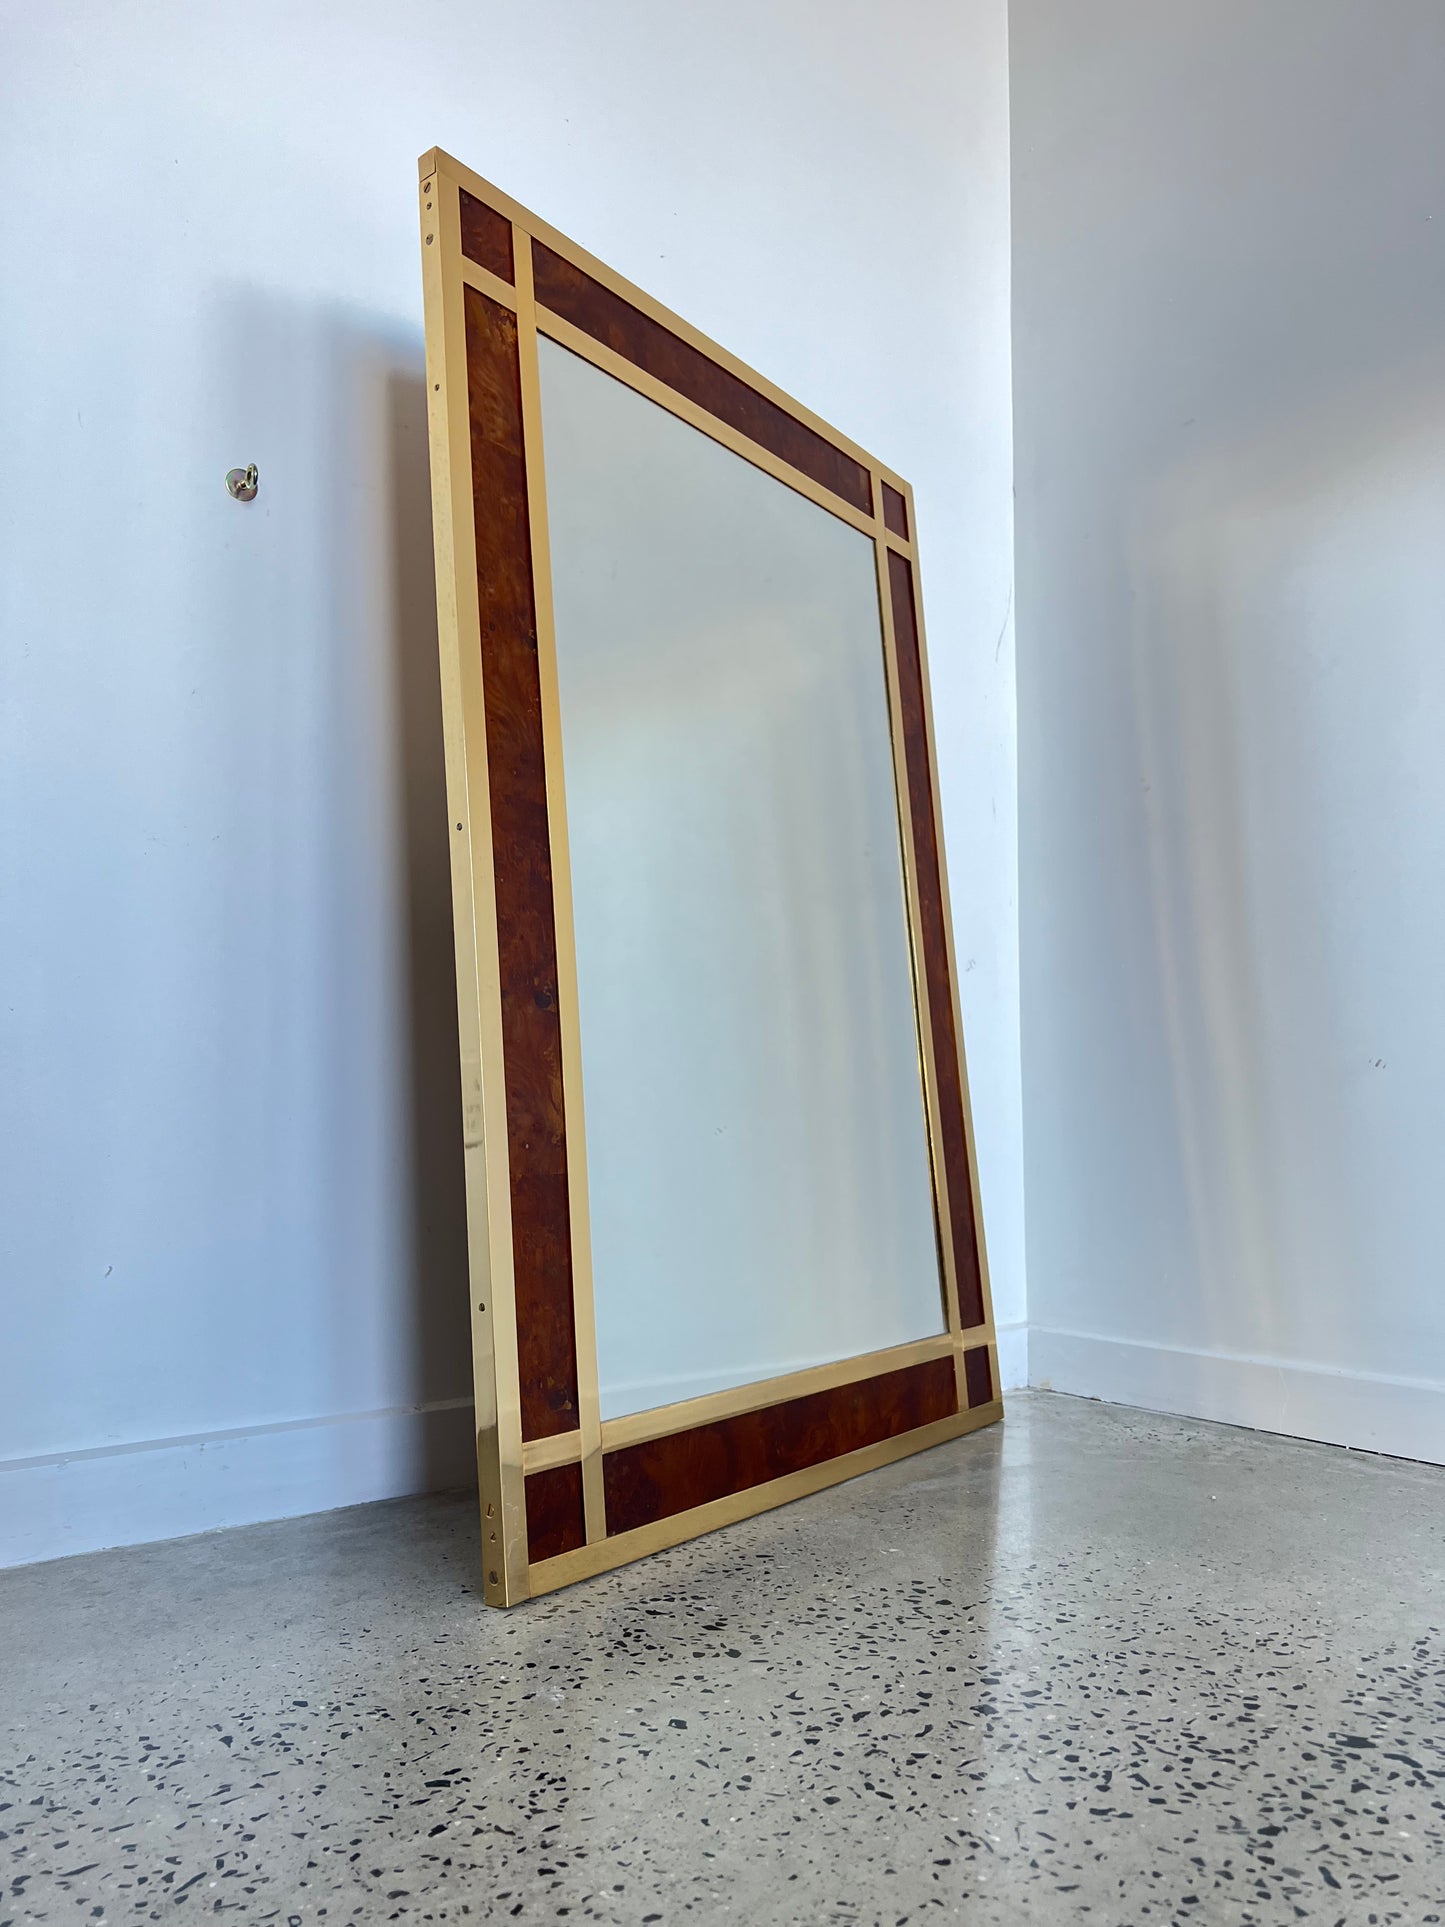 Willy Rizzo Rectangular Burlwood and Brass Wall Mirror, 1970